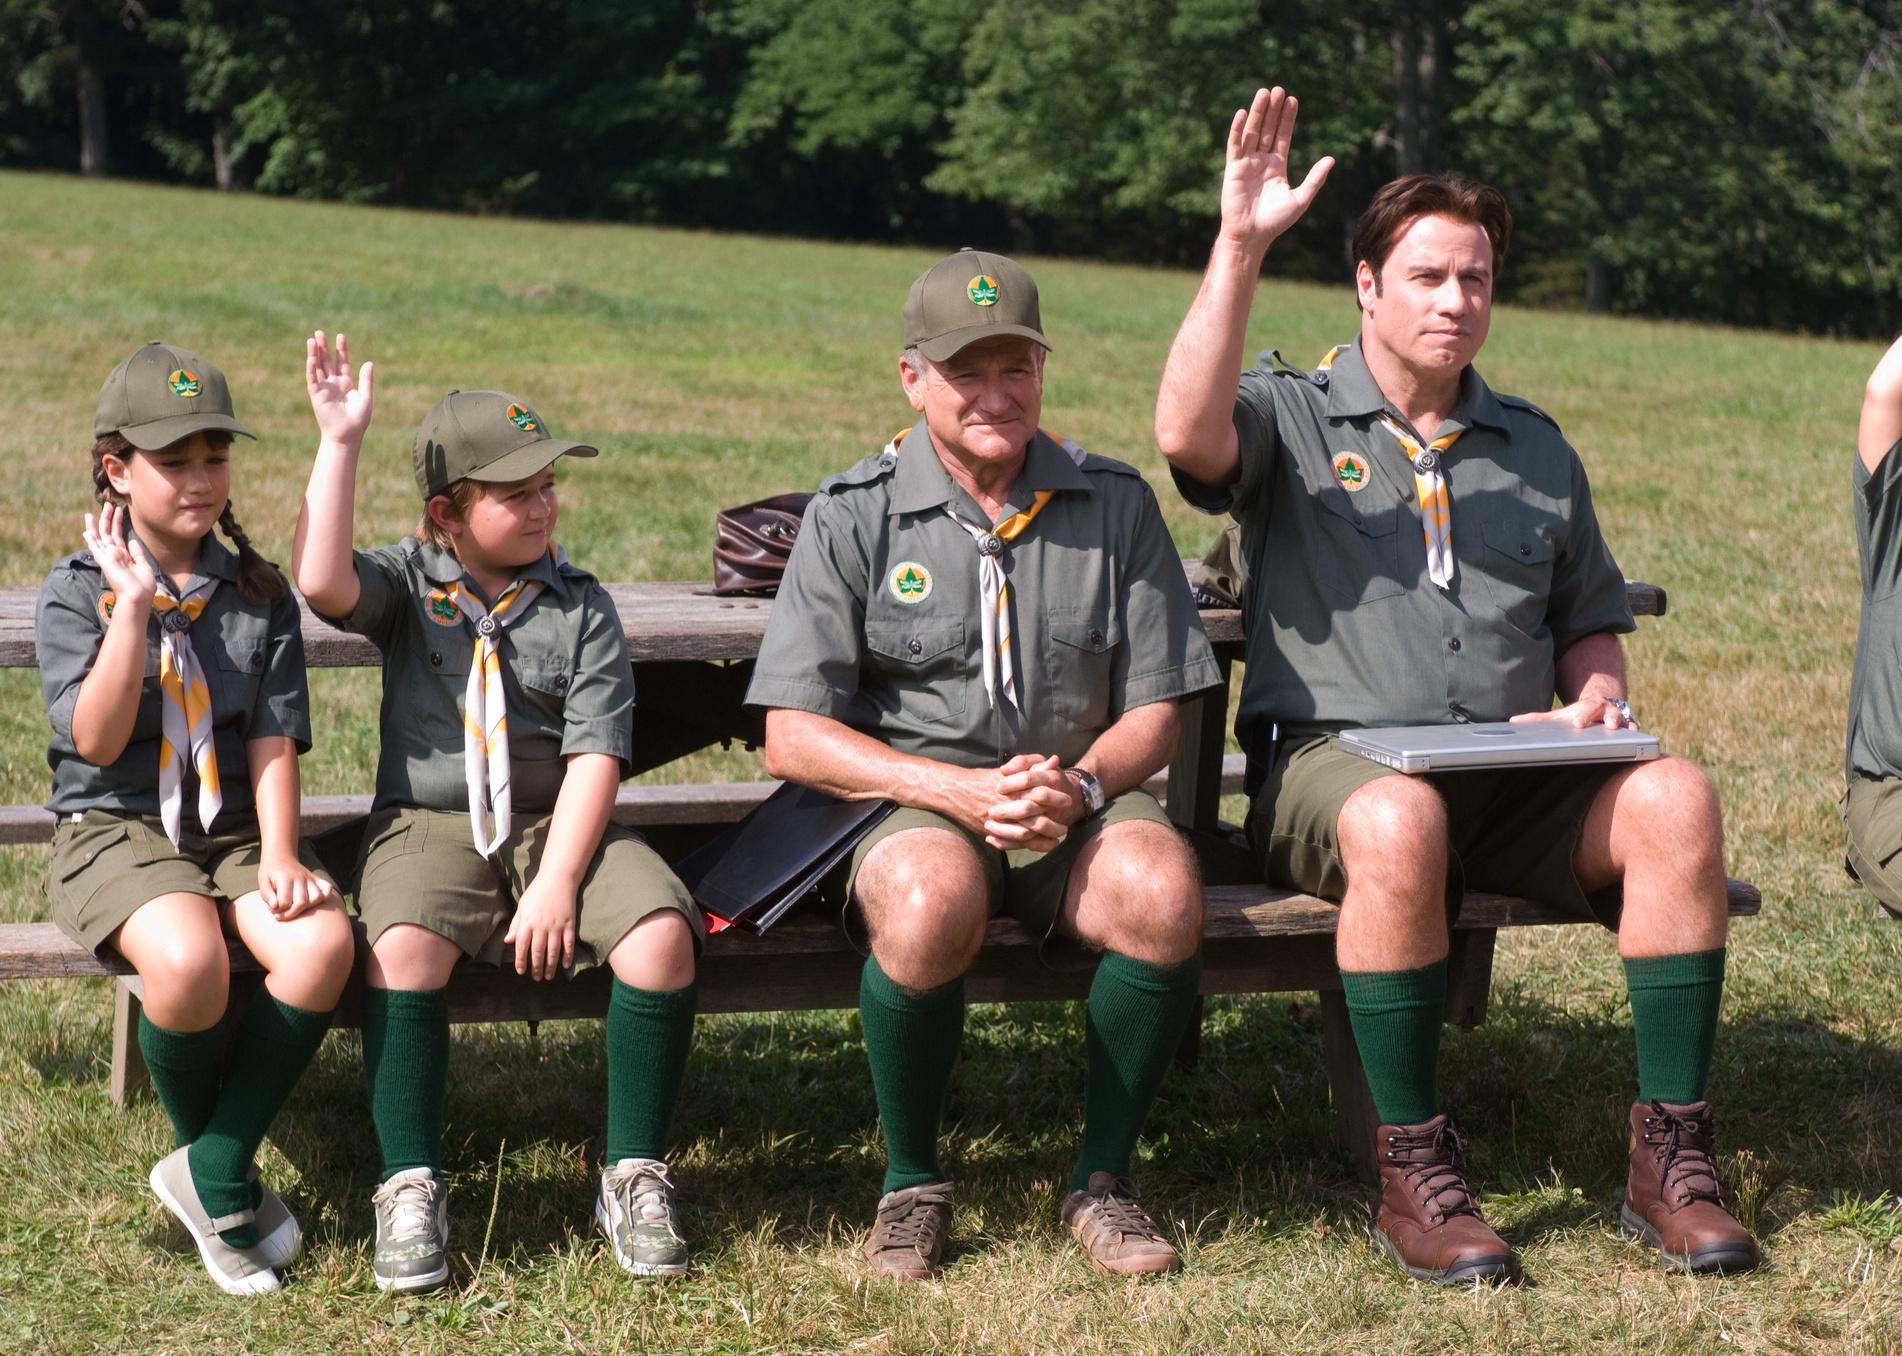 John Travolta, Robin Williams and two kids in green scout uniforms.